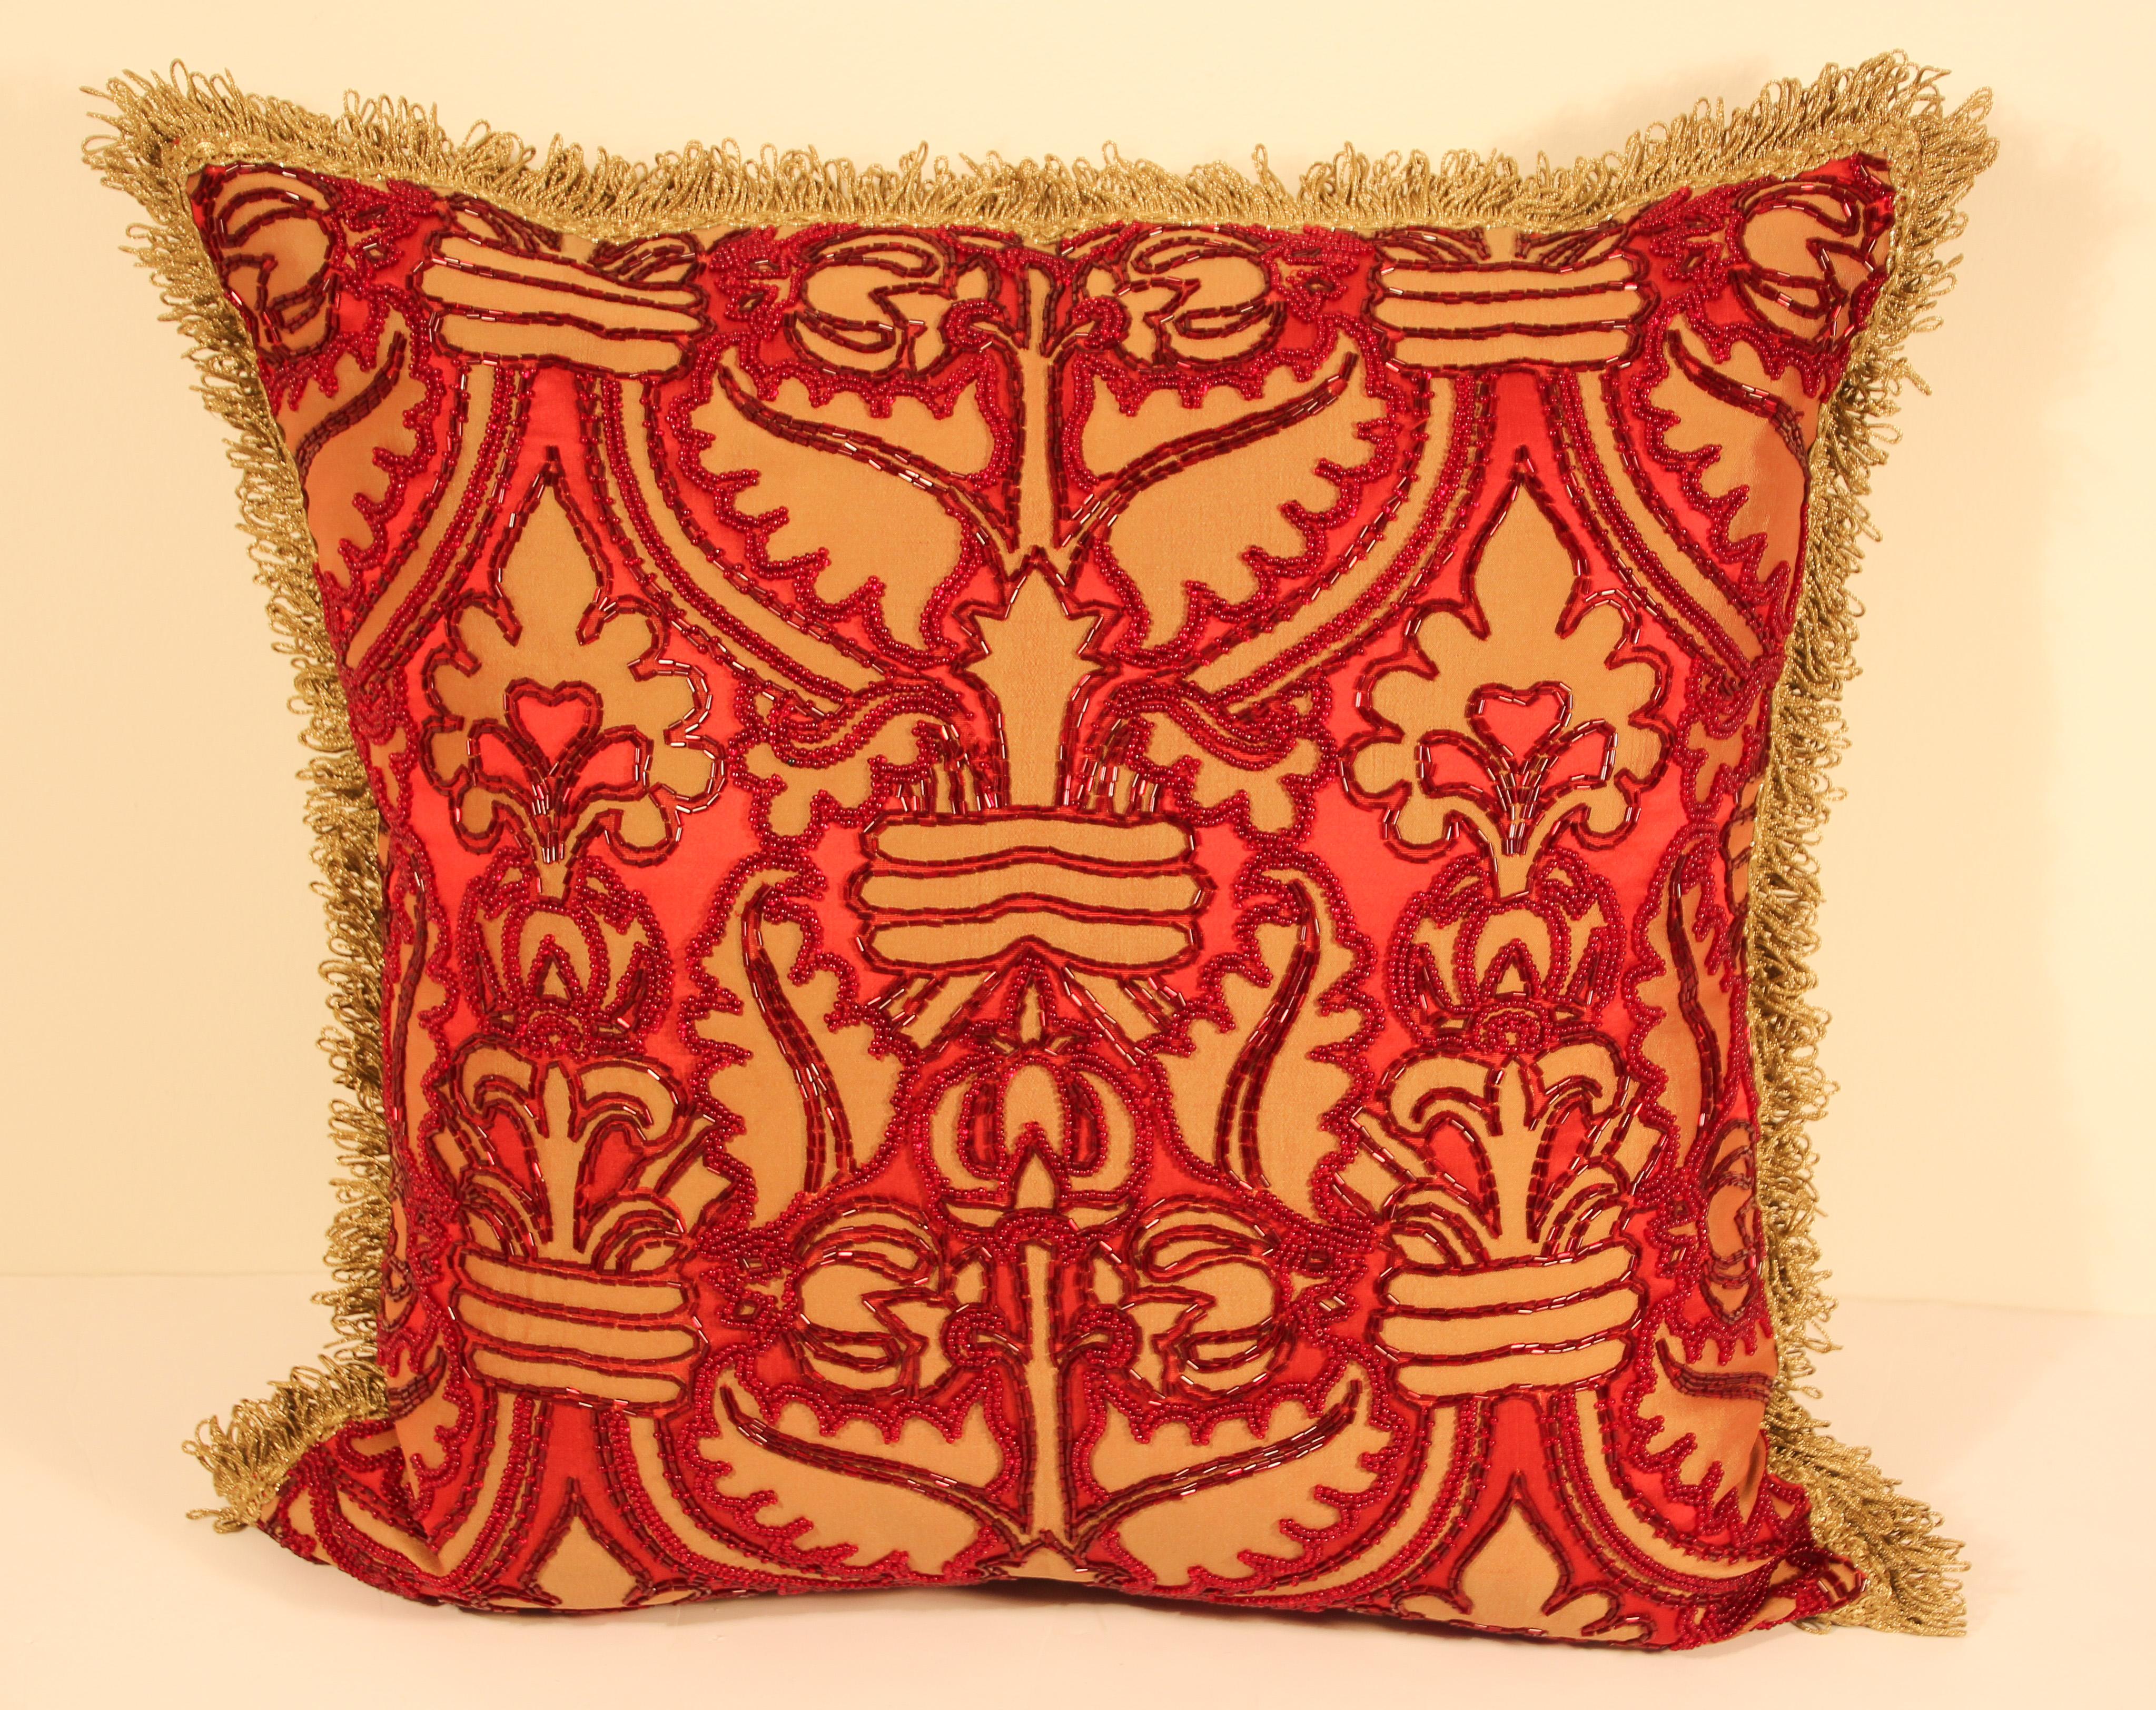 American Pair of Large Silk Pillows with Metallic Threads and Red Beads